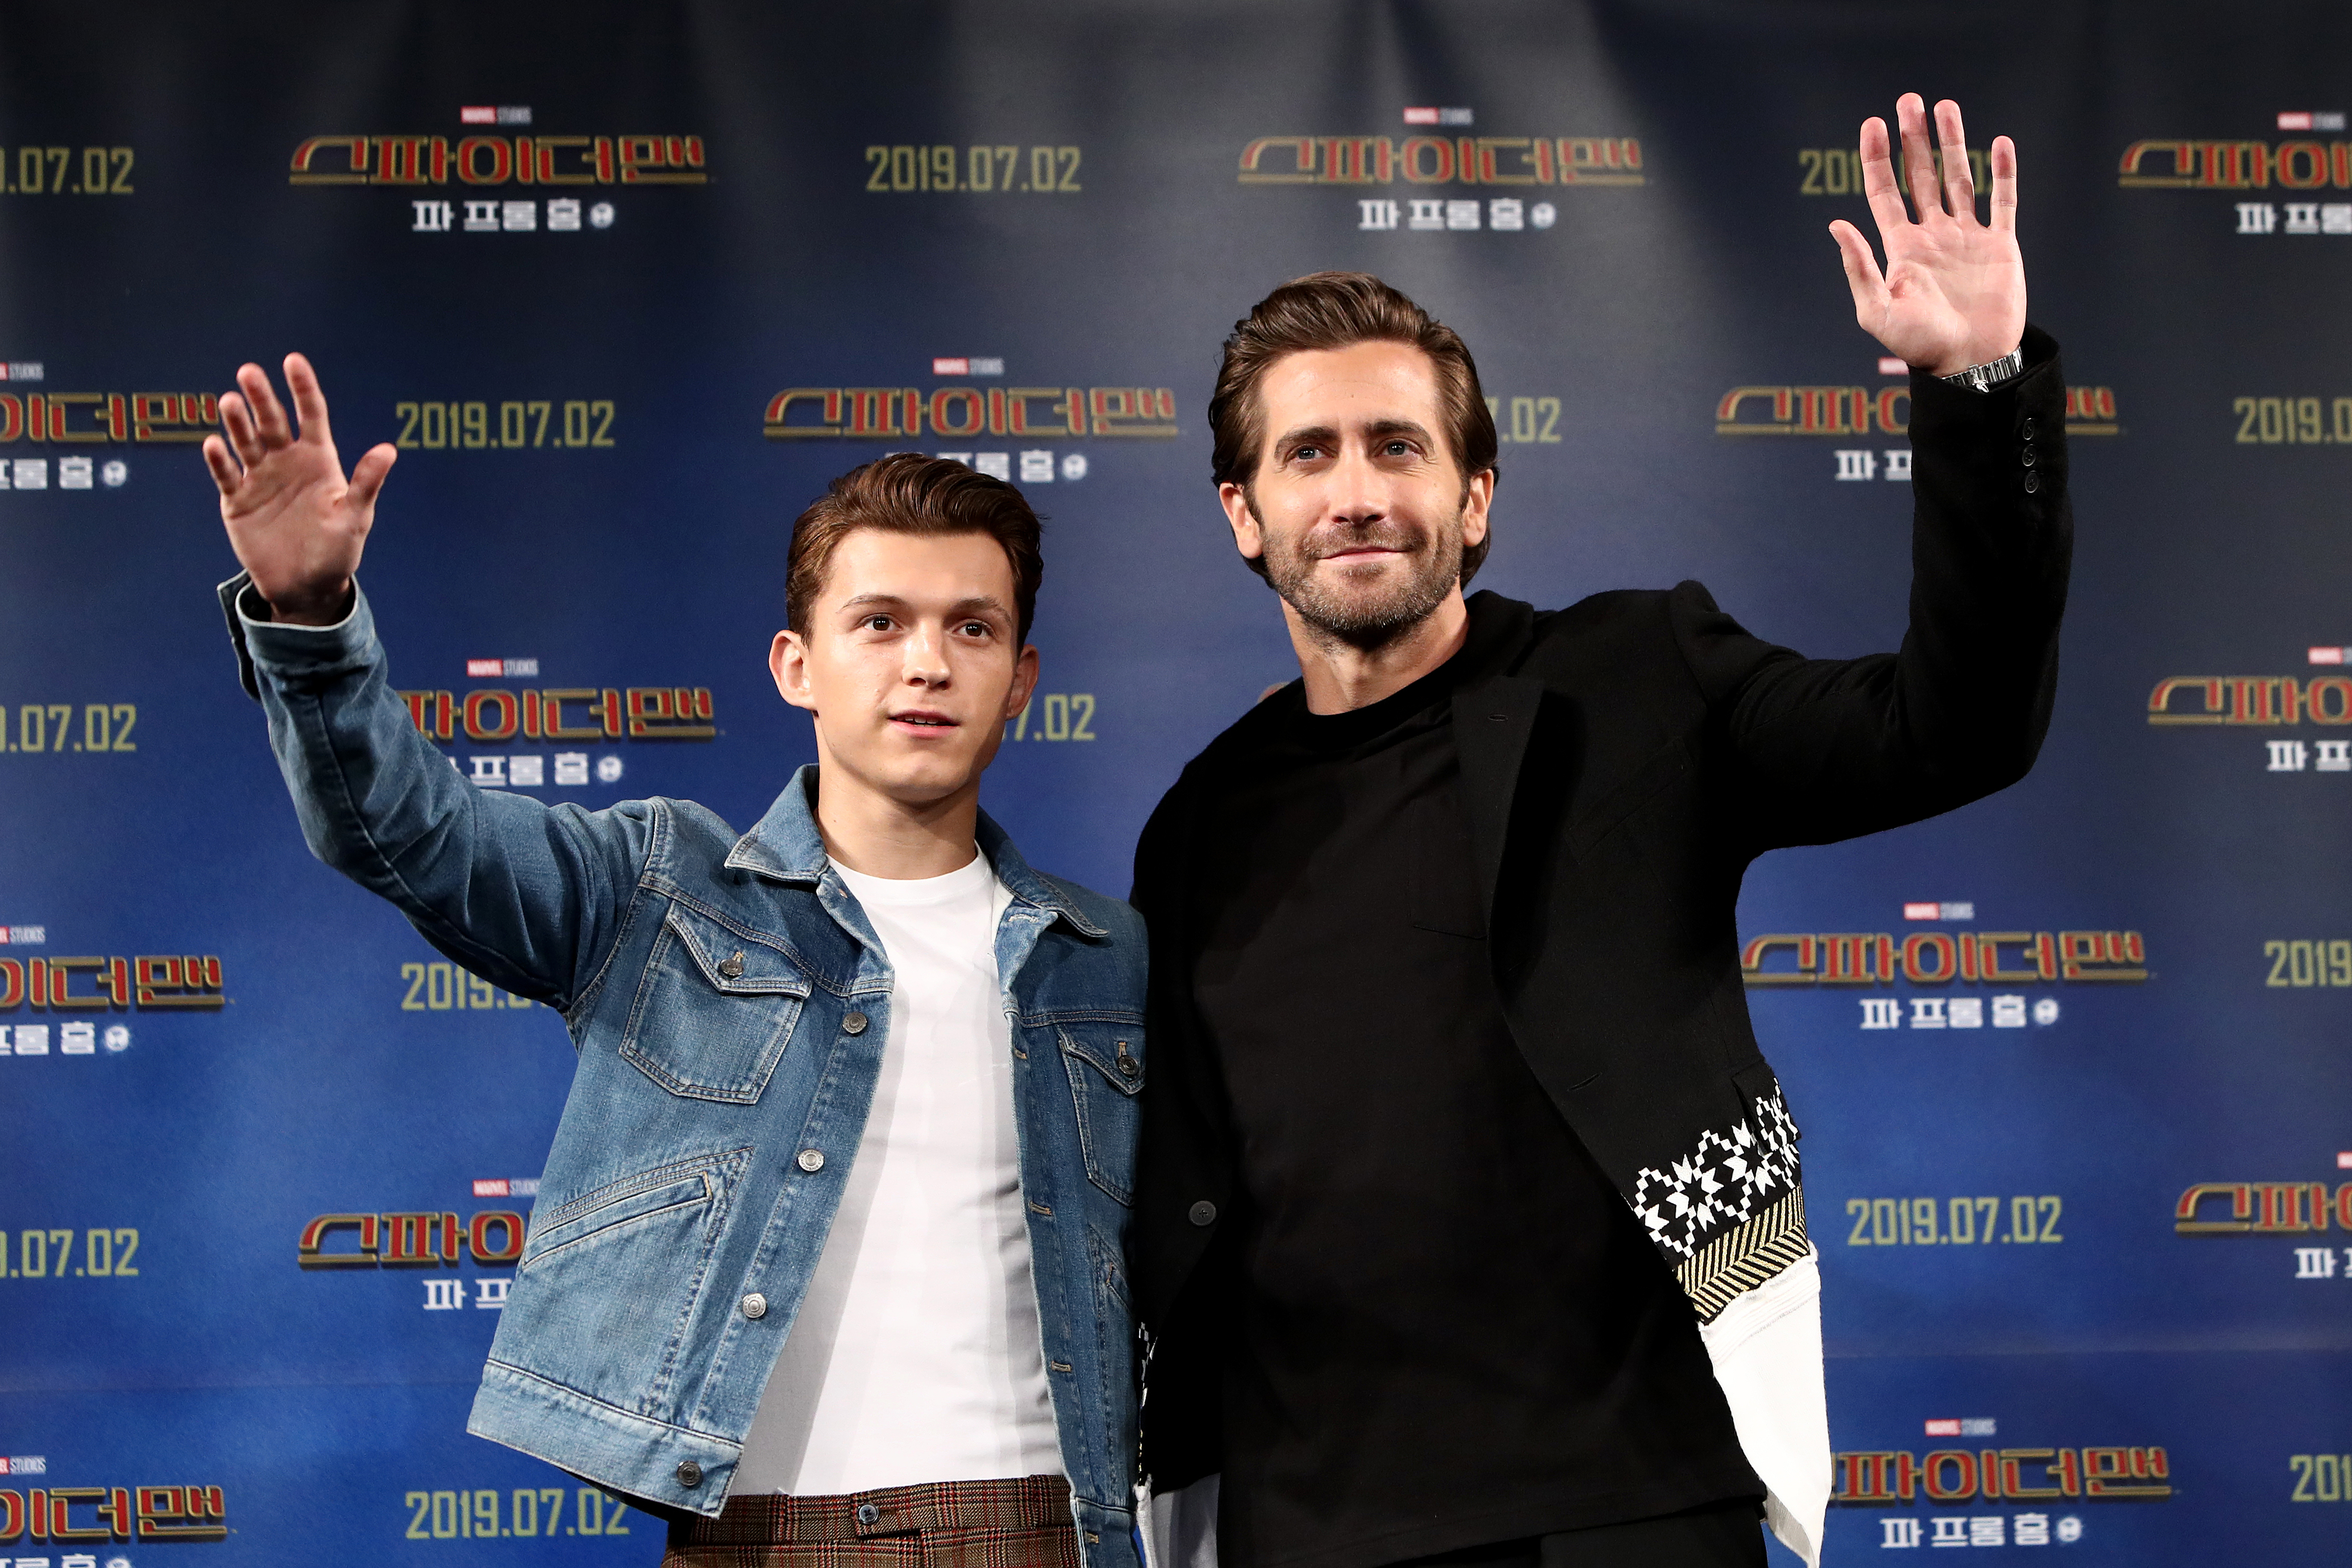 Tom Holland in denim jacket over plain shirt and Jake Gyllenhaal in a dark outfit, waving at an event